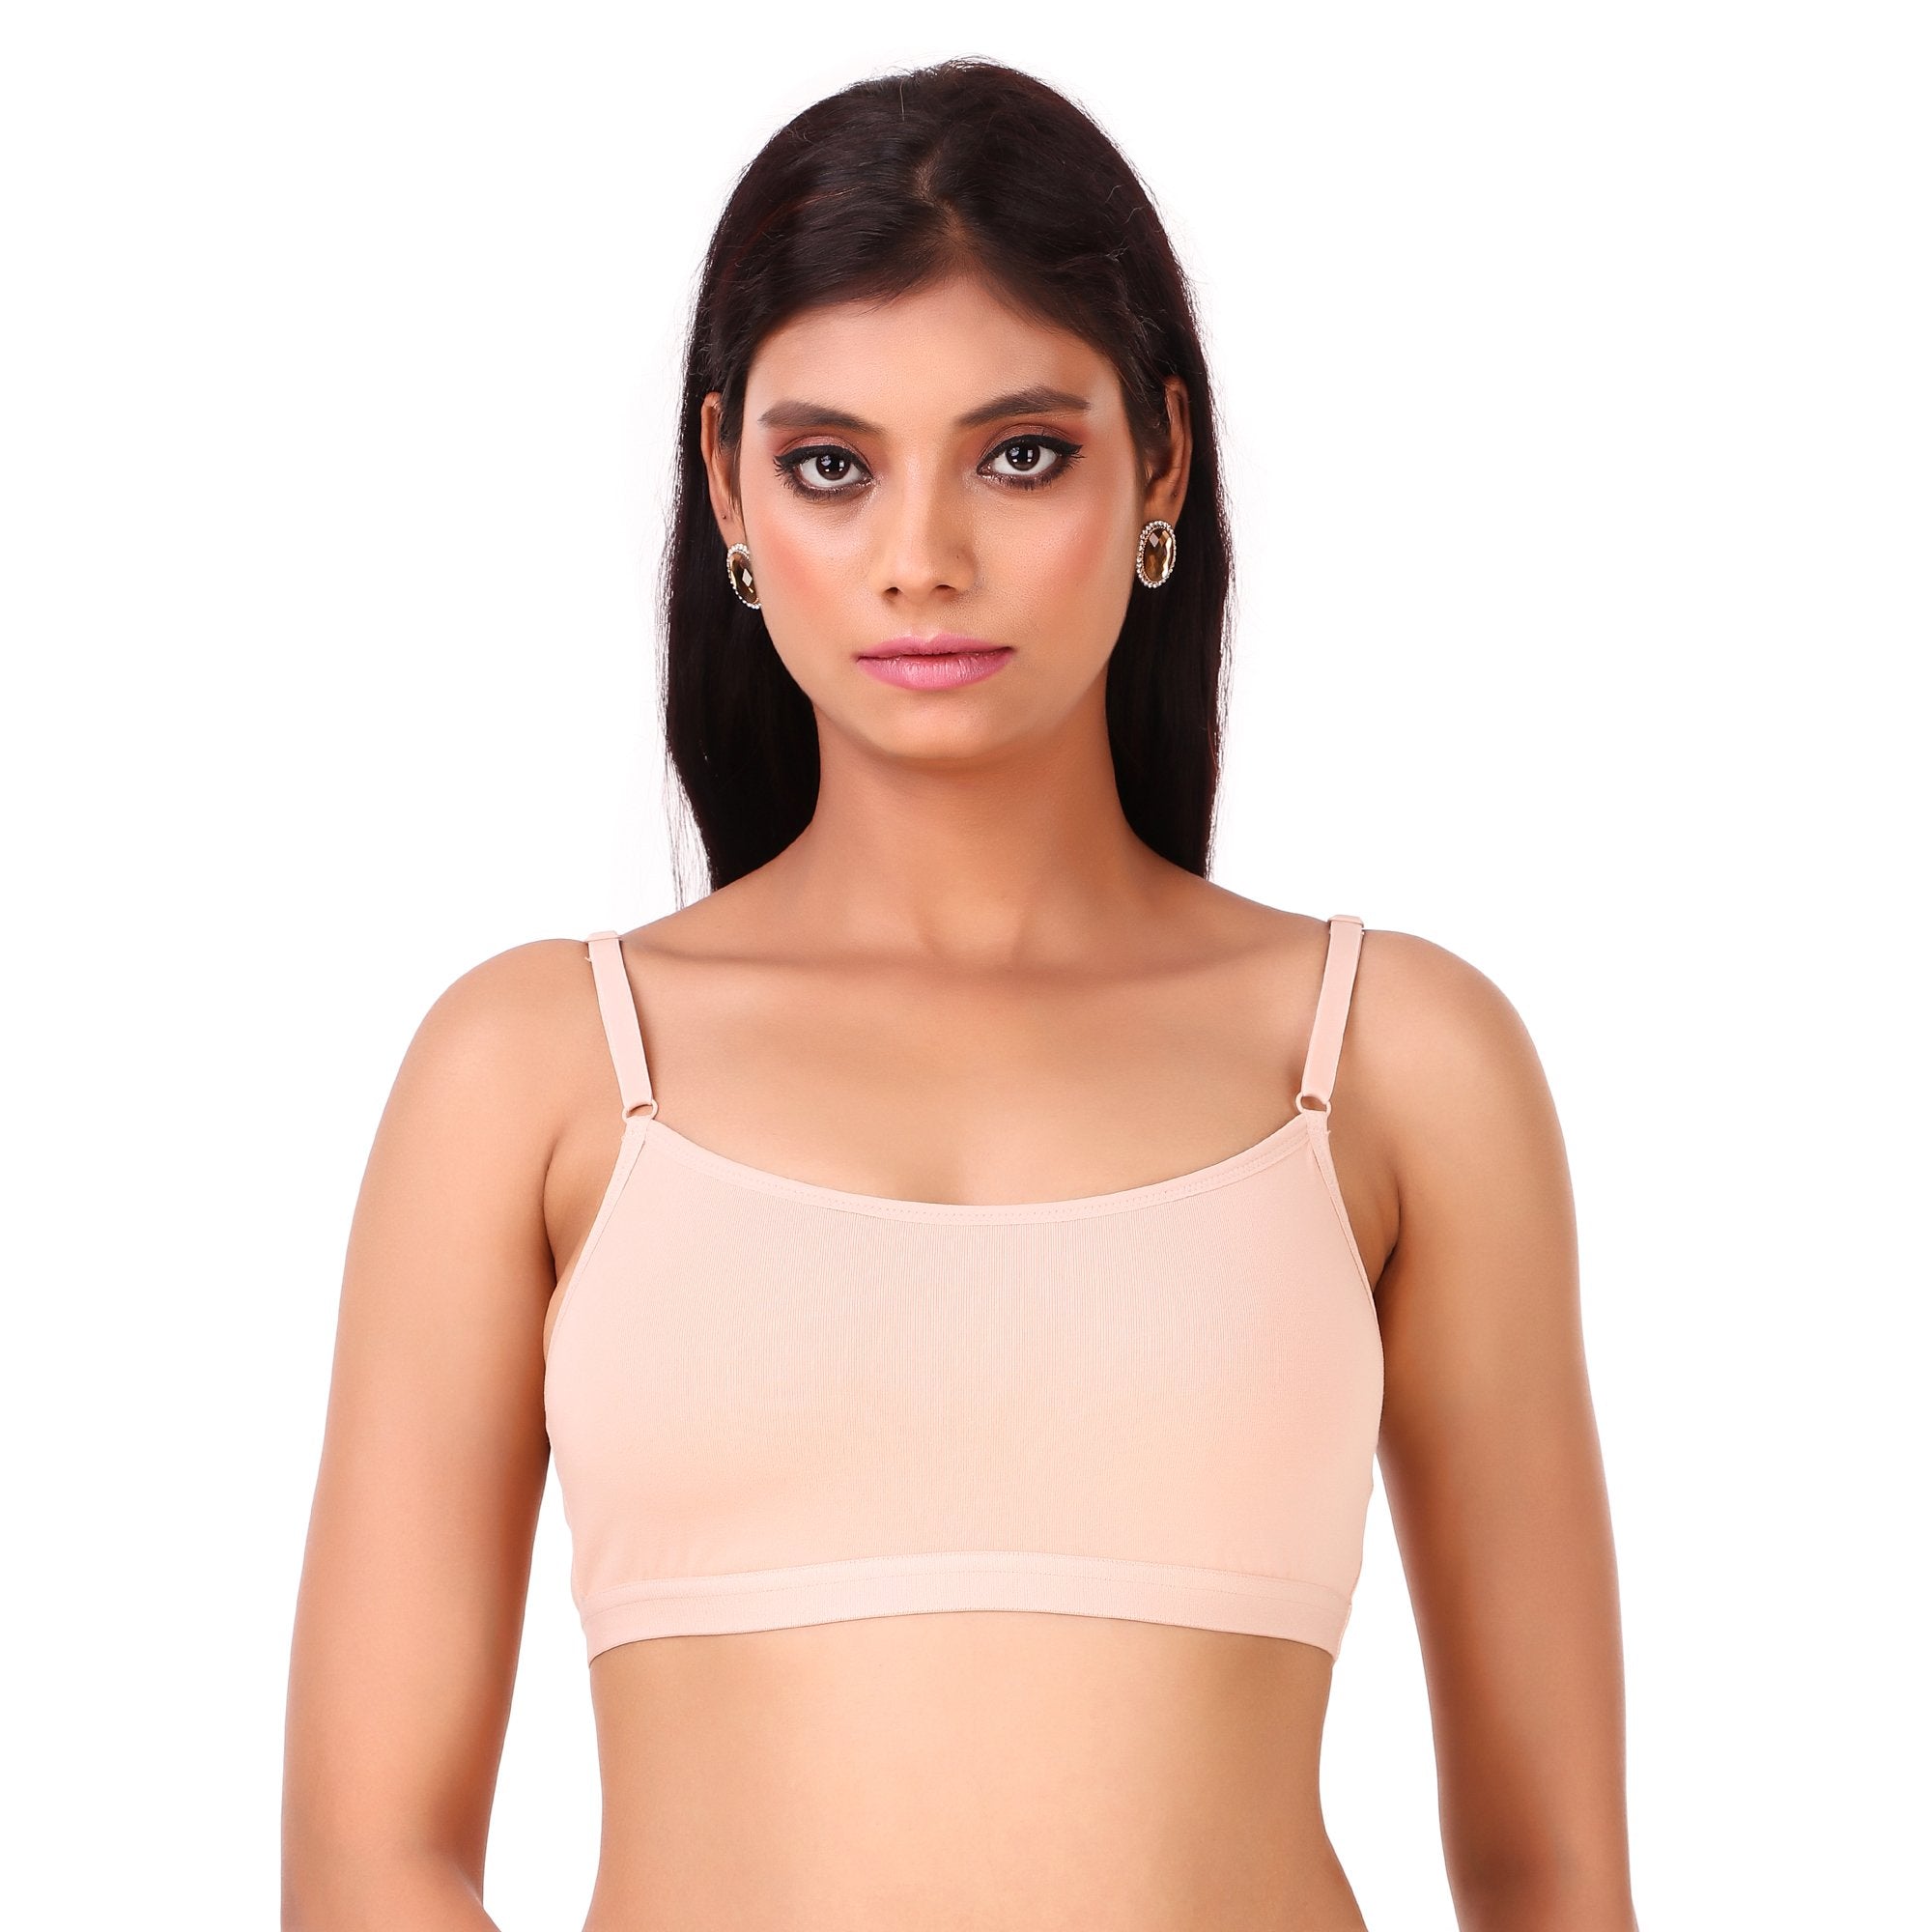 Enamor SB06 Cotton Low Impact Slip on Everyday Sports Bra for Women -  Non-Padded, Non-Wired